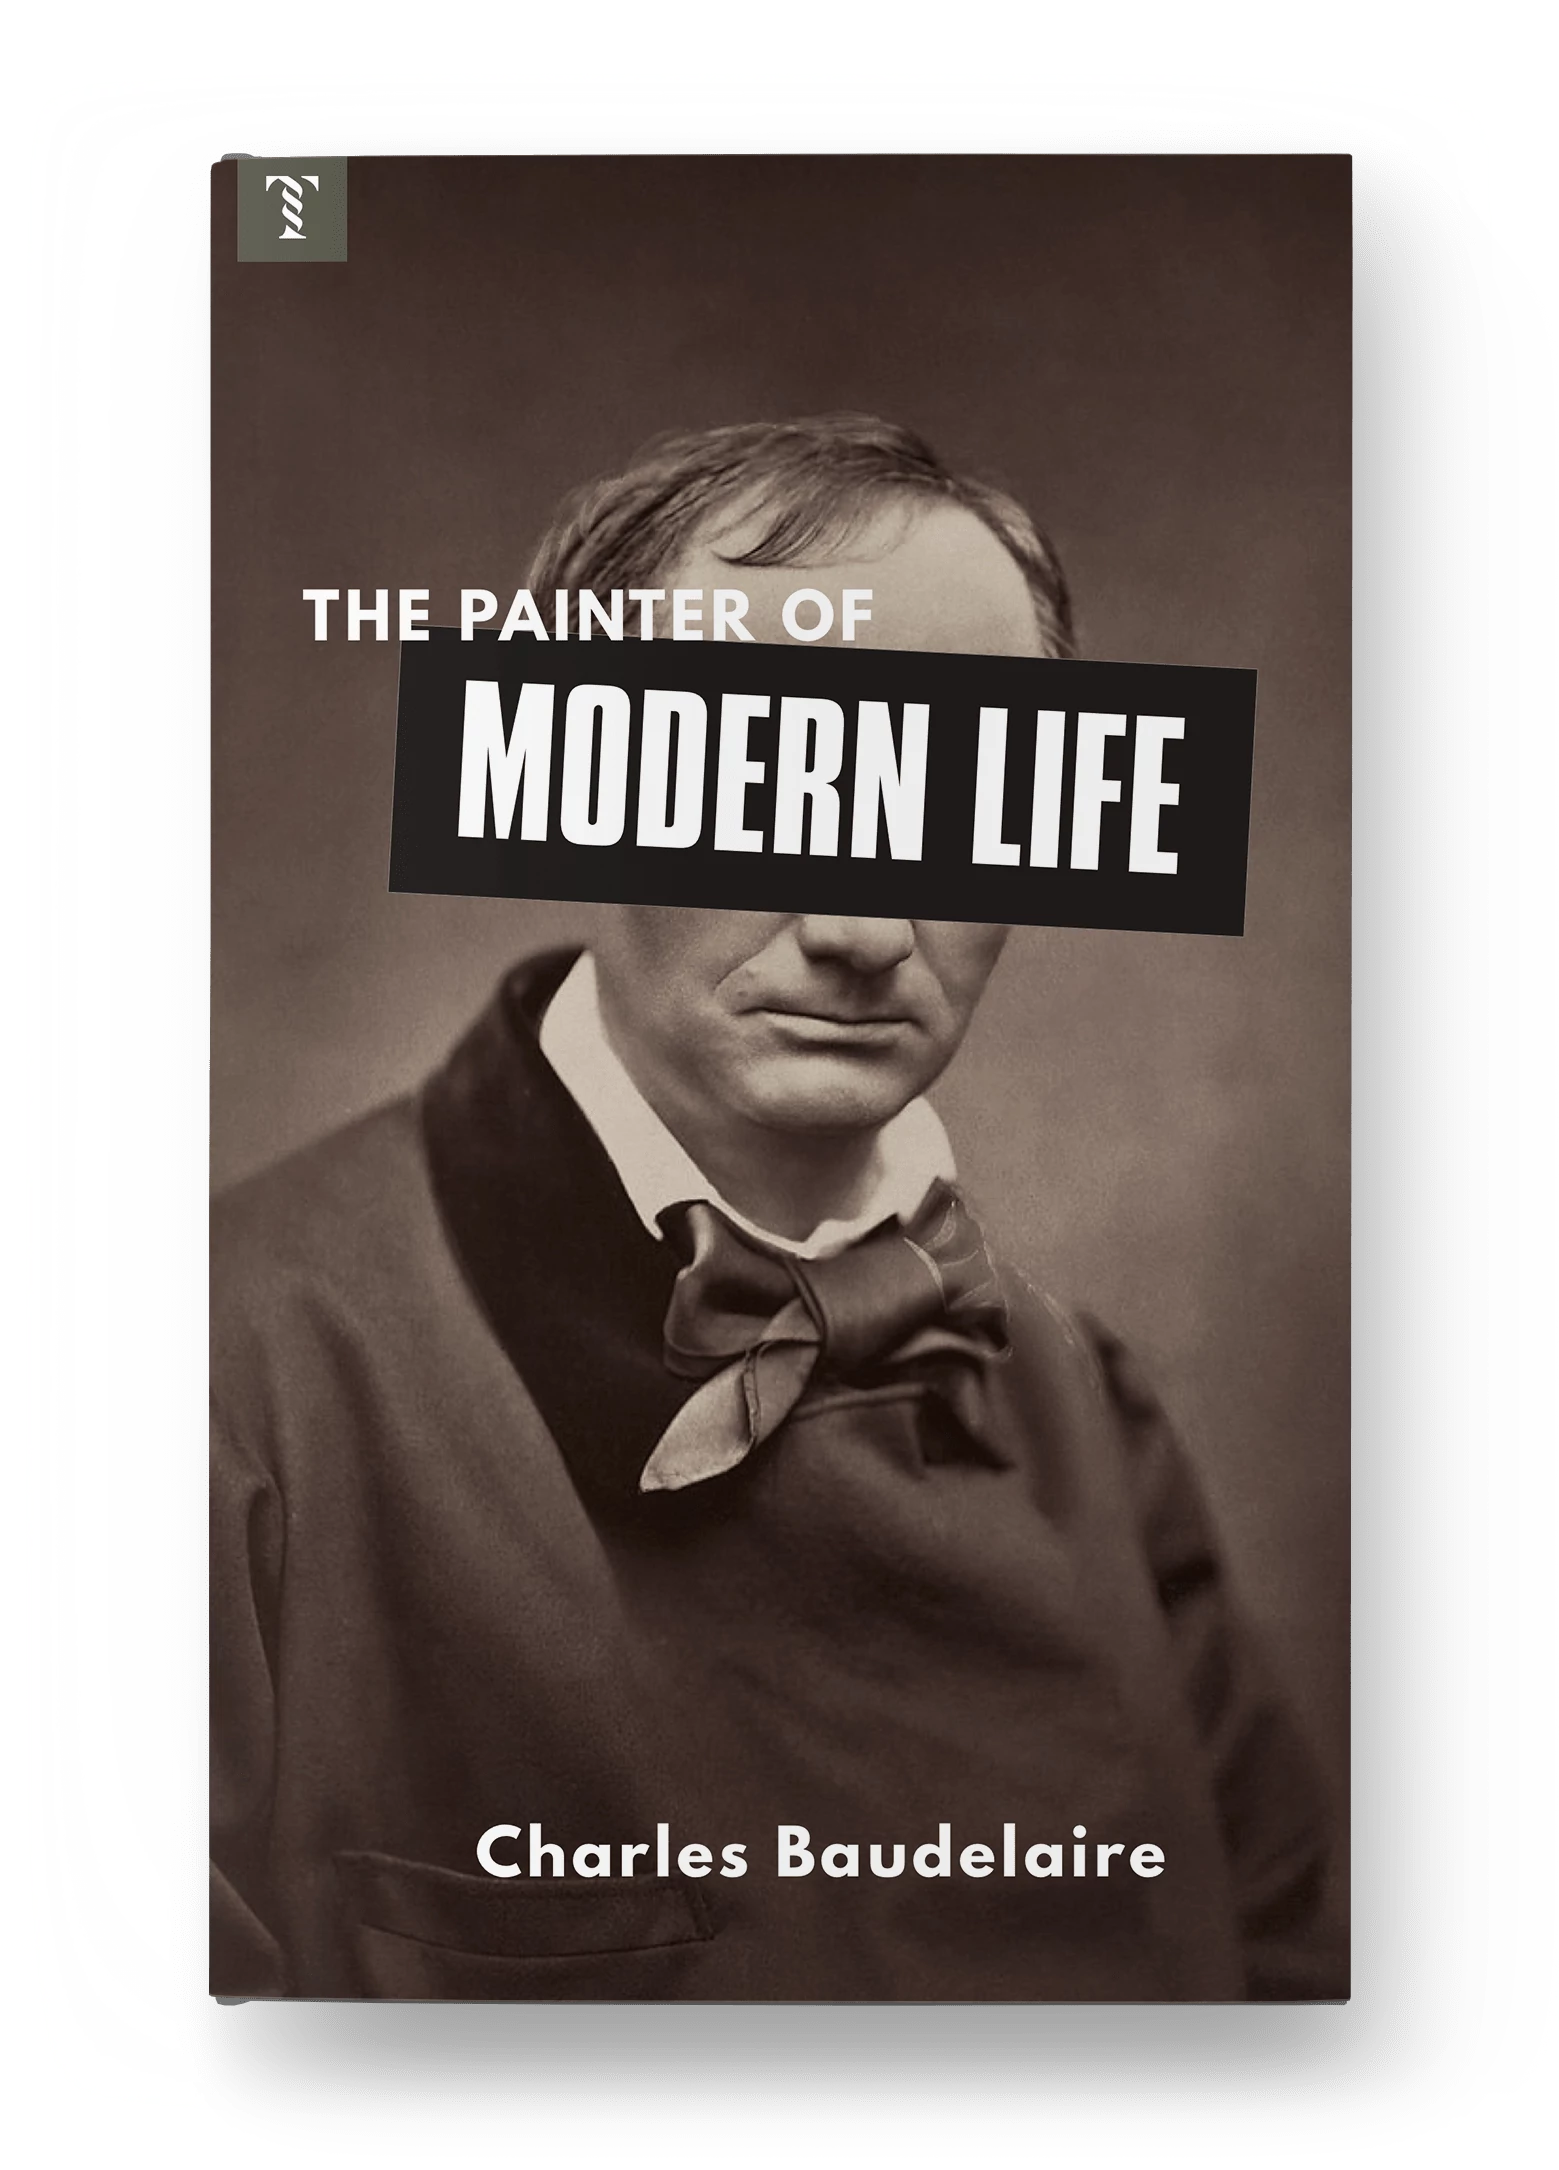 The Painter of Modern Life, Impressionism